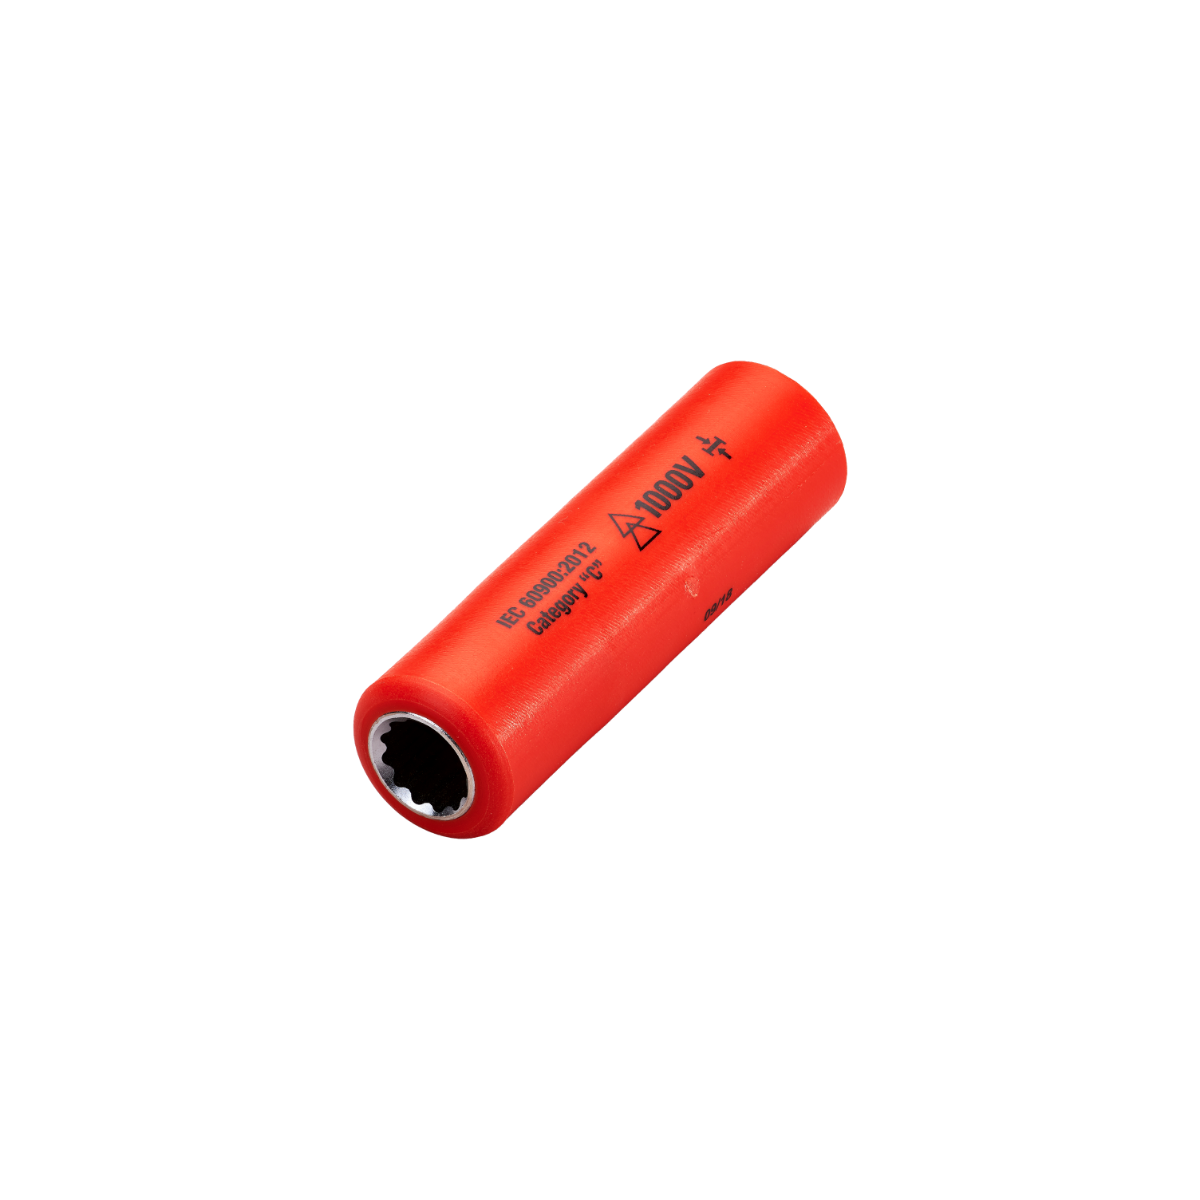 ITL Insulated Tools Ltd 12mm Square Deep Socket With 1/4 in Drive , Length 65 mm